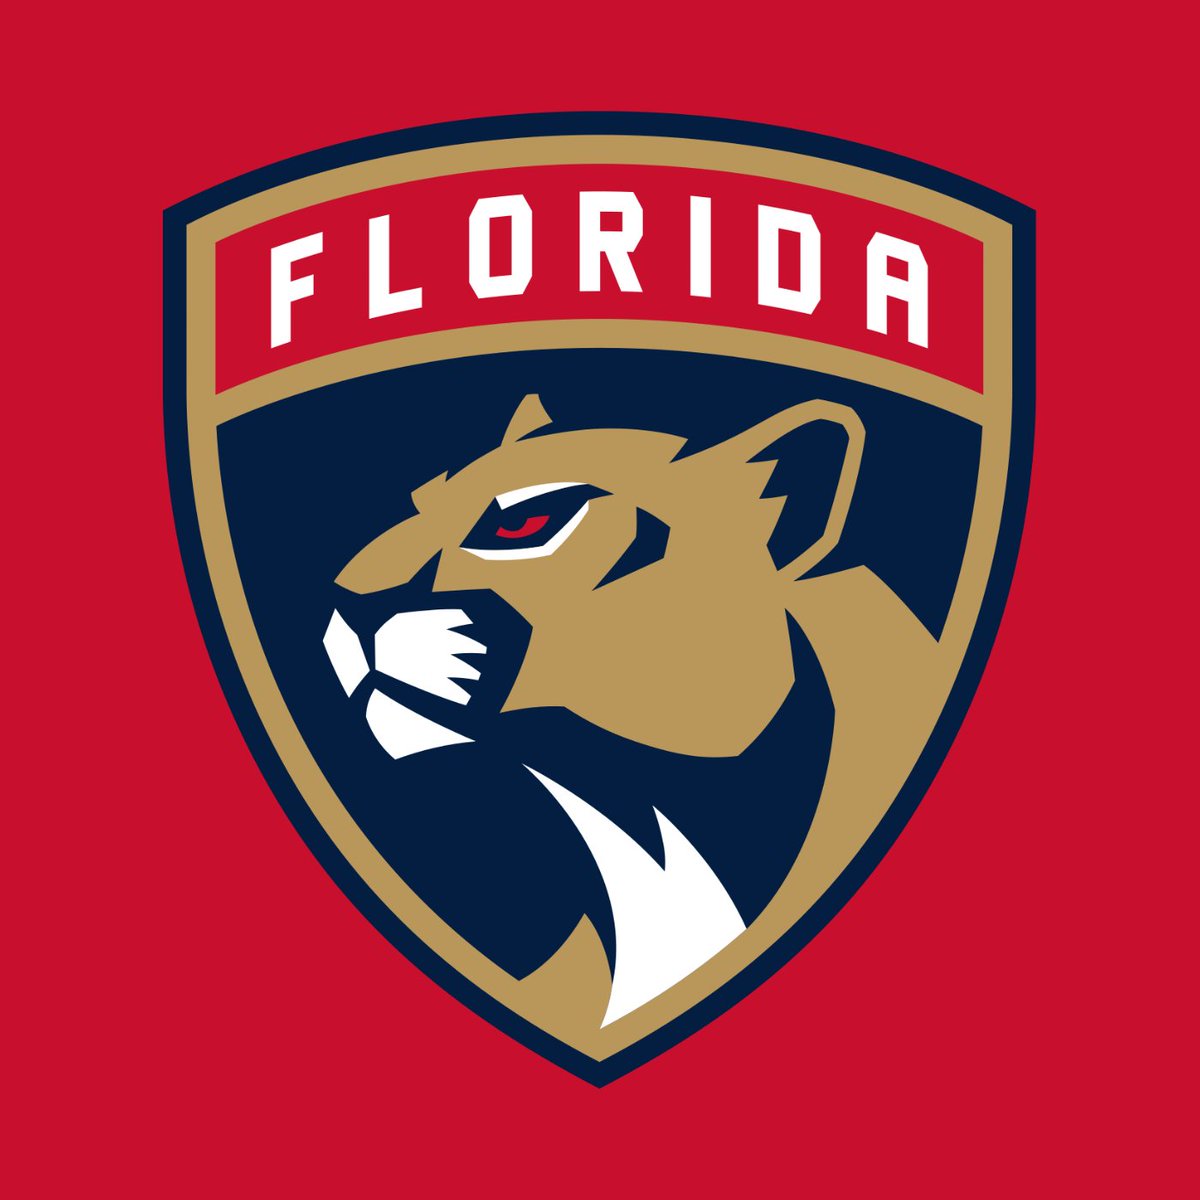 With the 53rd overall selection in the NHL Draft, the Florida Panthers are proud to select: Big Floppa. https://t.co/Zbn9TQ7wv1